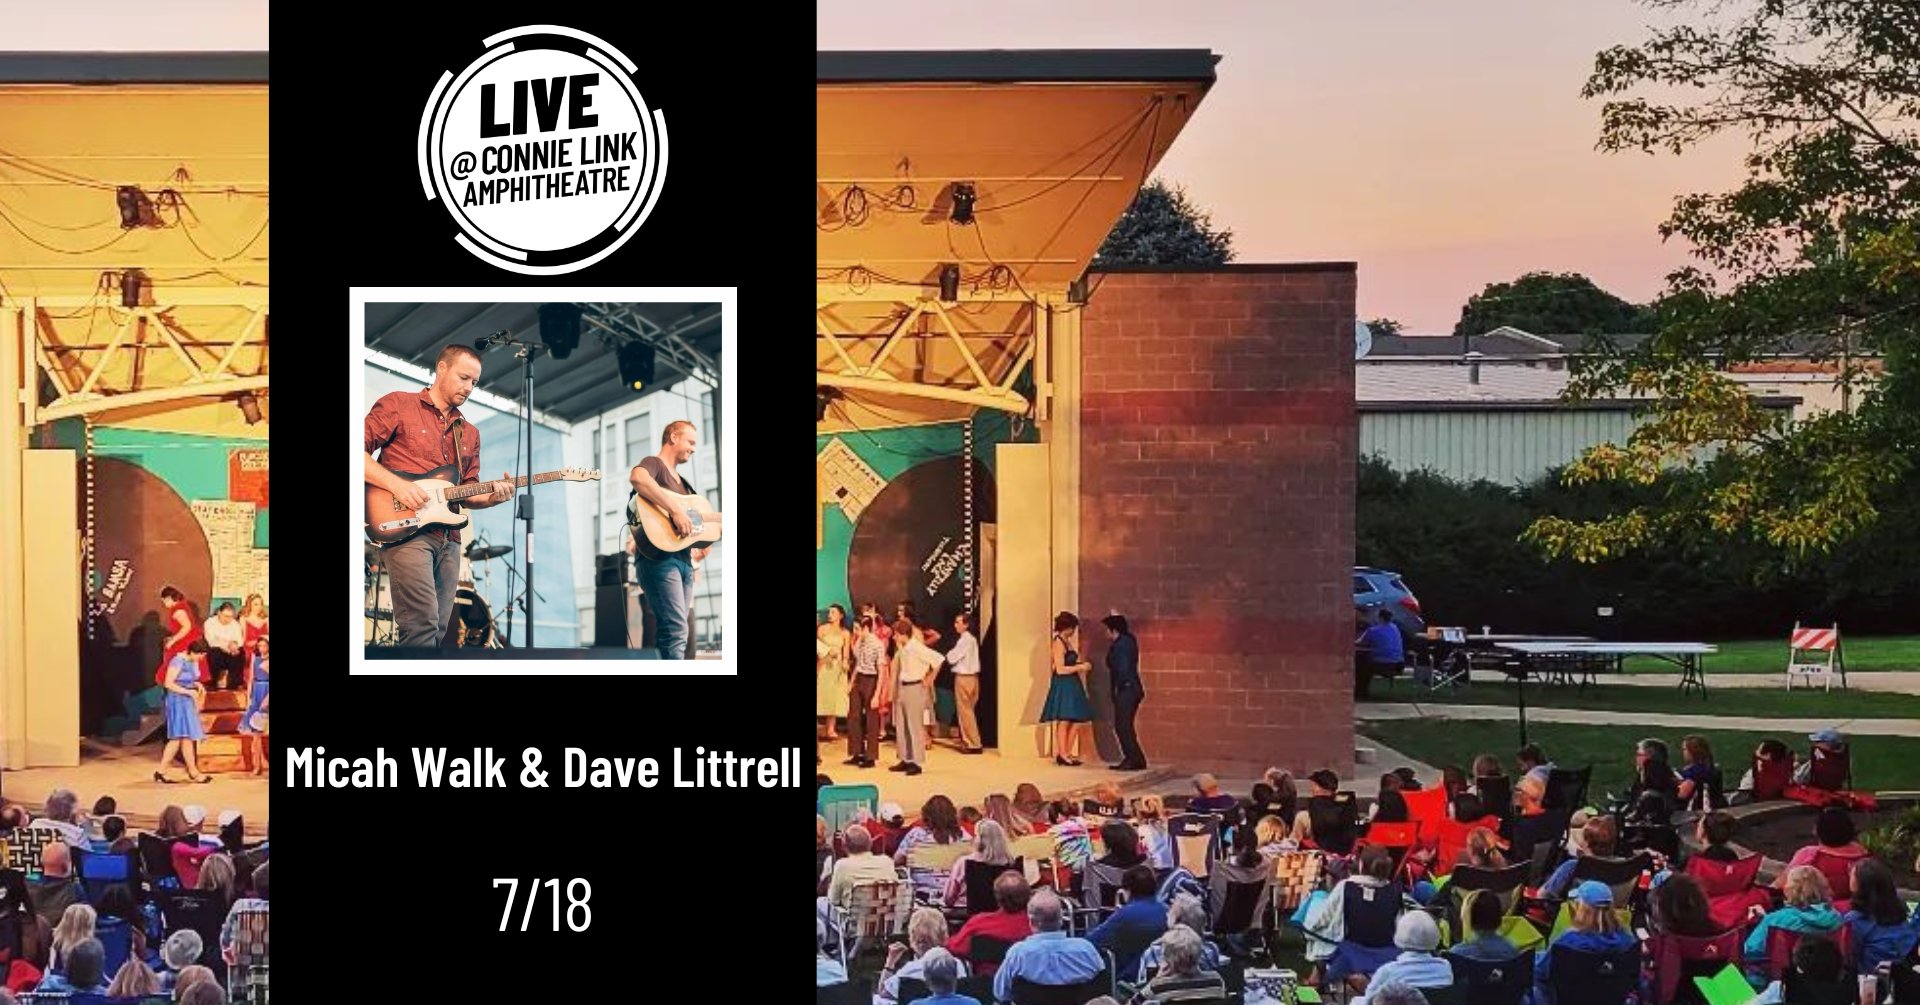 Normal LIVE presents Micah Walk & Dave Littrell of The Deep Hollow @ Connie Link Amphitheatre